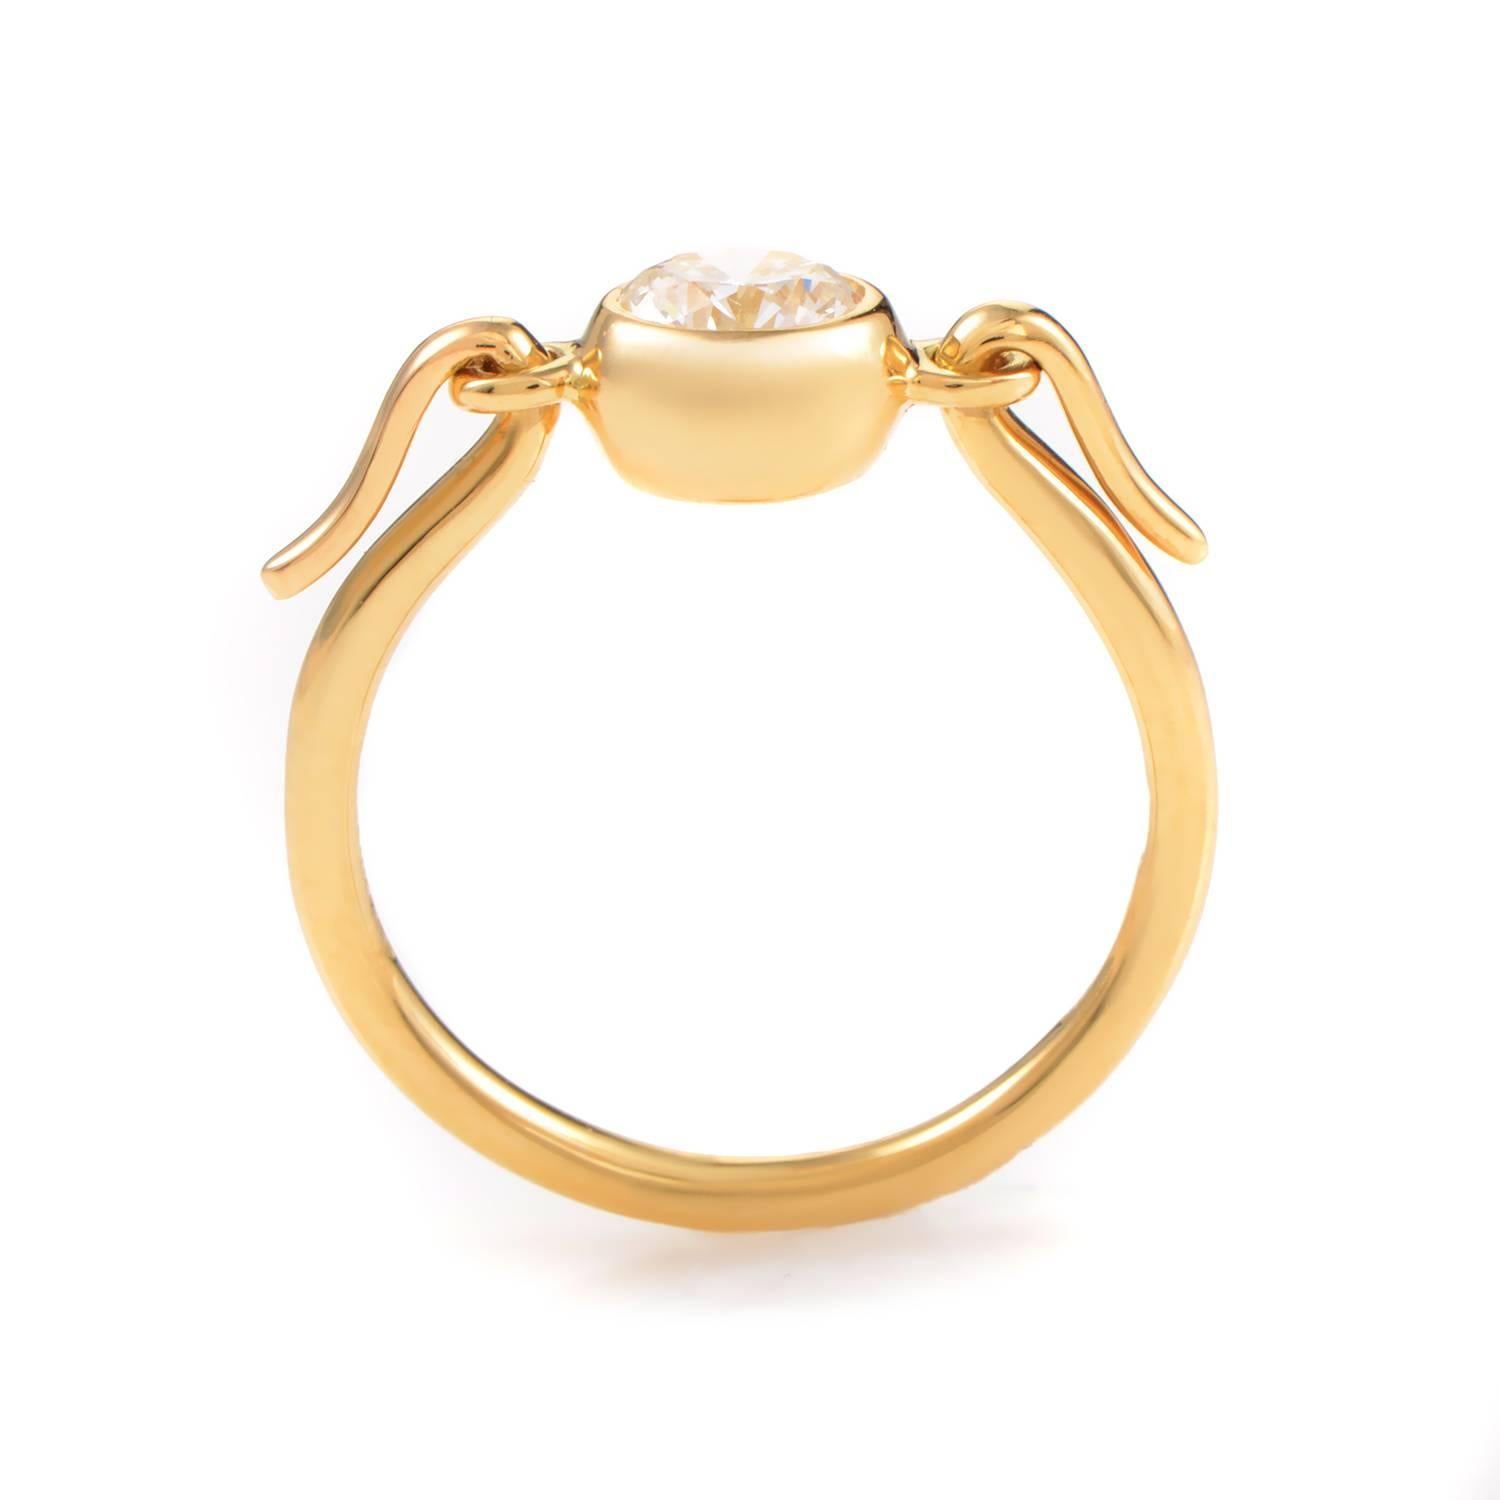 A seemingly classic design with an intriguing and graceful twist at the very top of this slim 18K yellow gold body, this enchanting ring from Tiffany & Co. is an epitome of gorgeous elegance and subtle luxury, boasting a glistening 0.70ct diamond